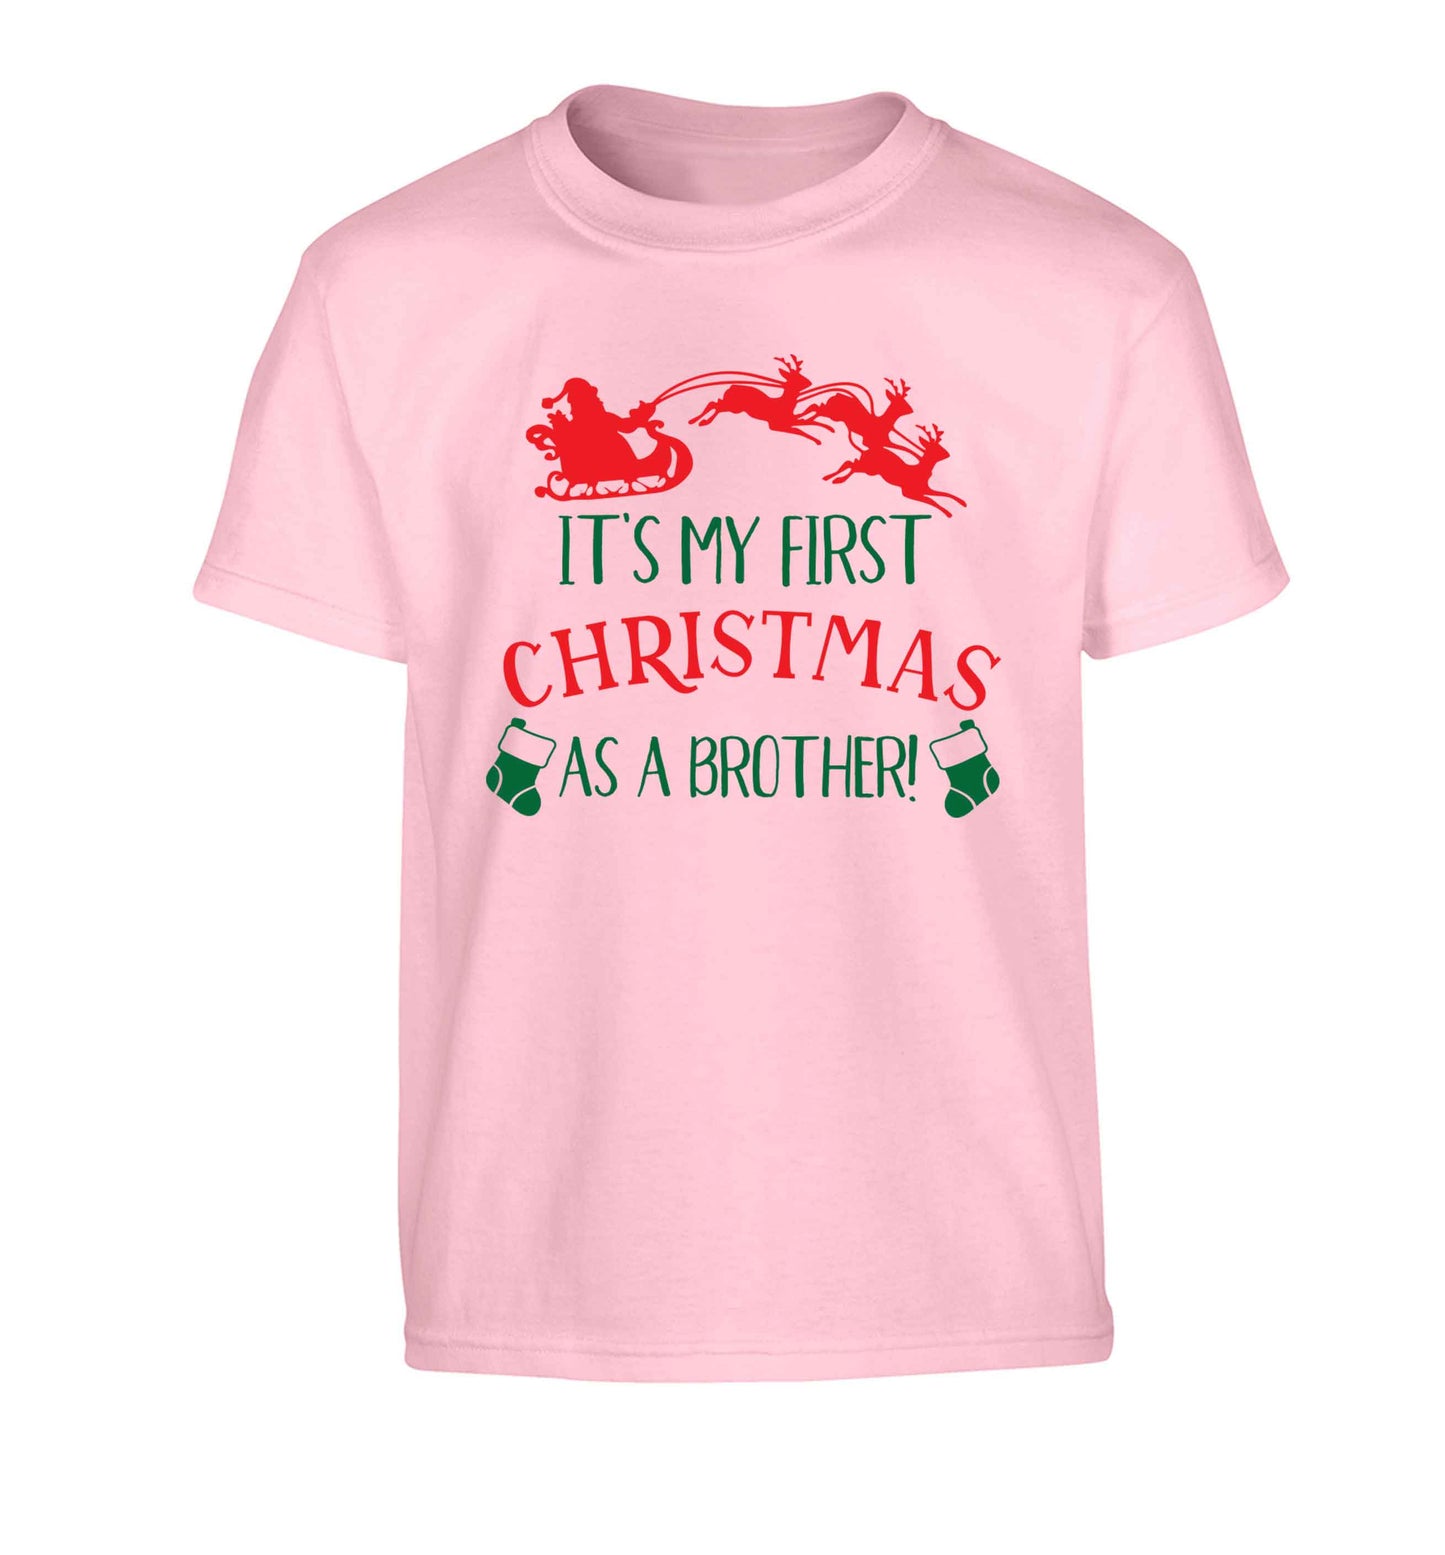 It's my first Christmas as a brother! Children's light pink Tshirt 12-13 Years